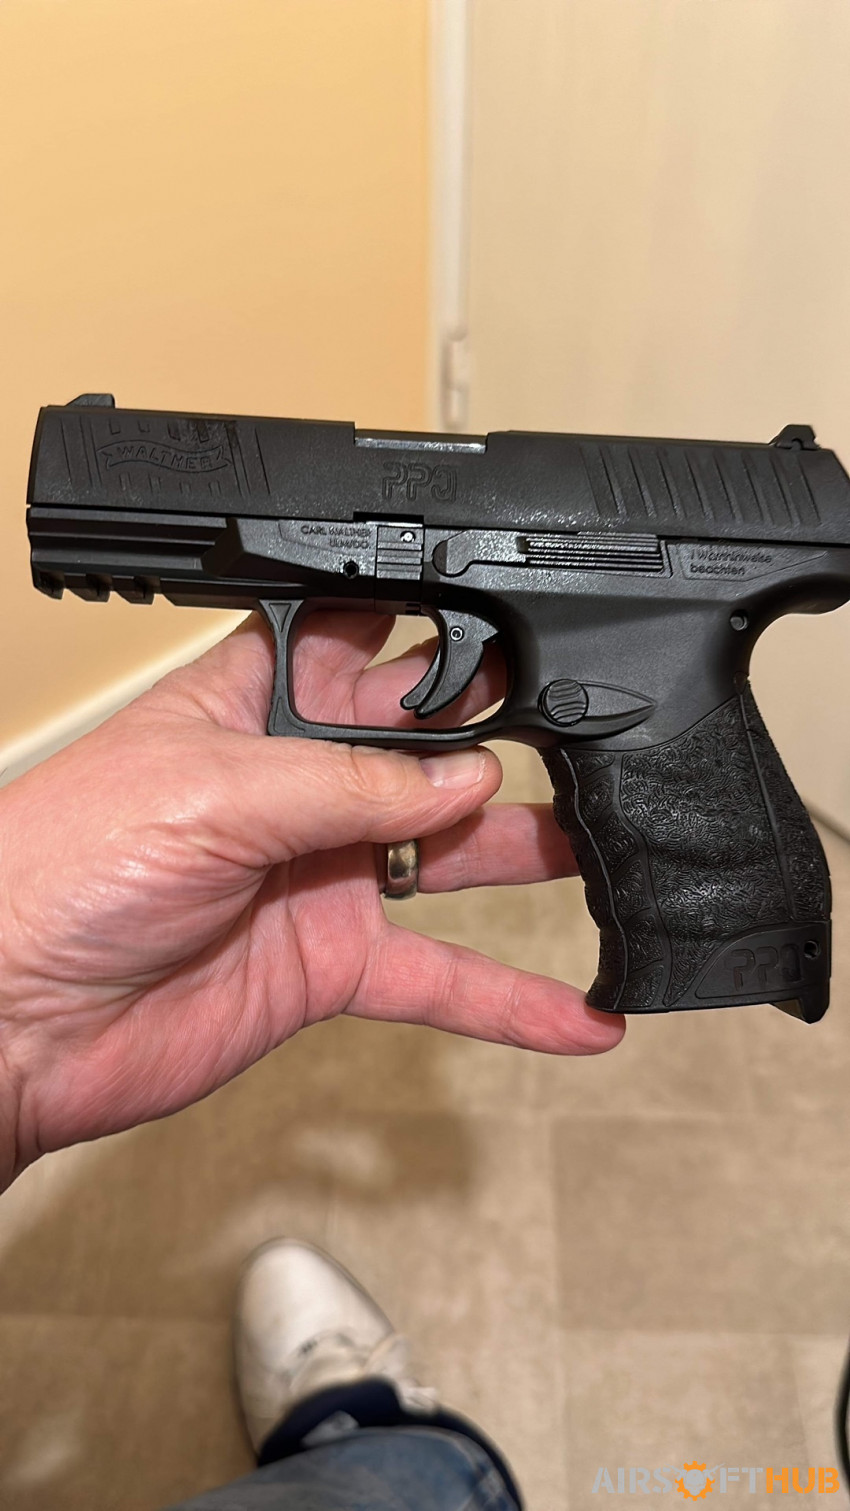 Walther PPQ - Used airsoft equipment